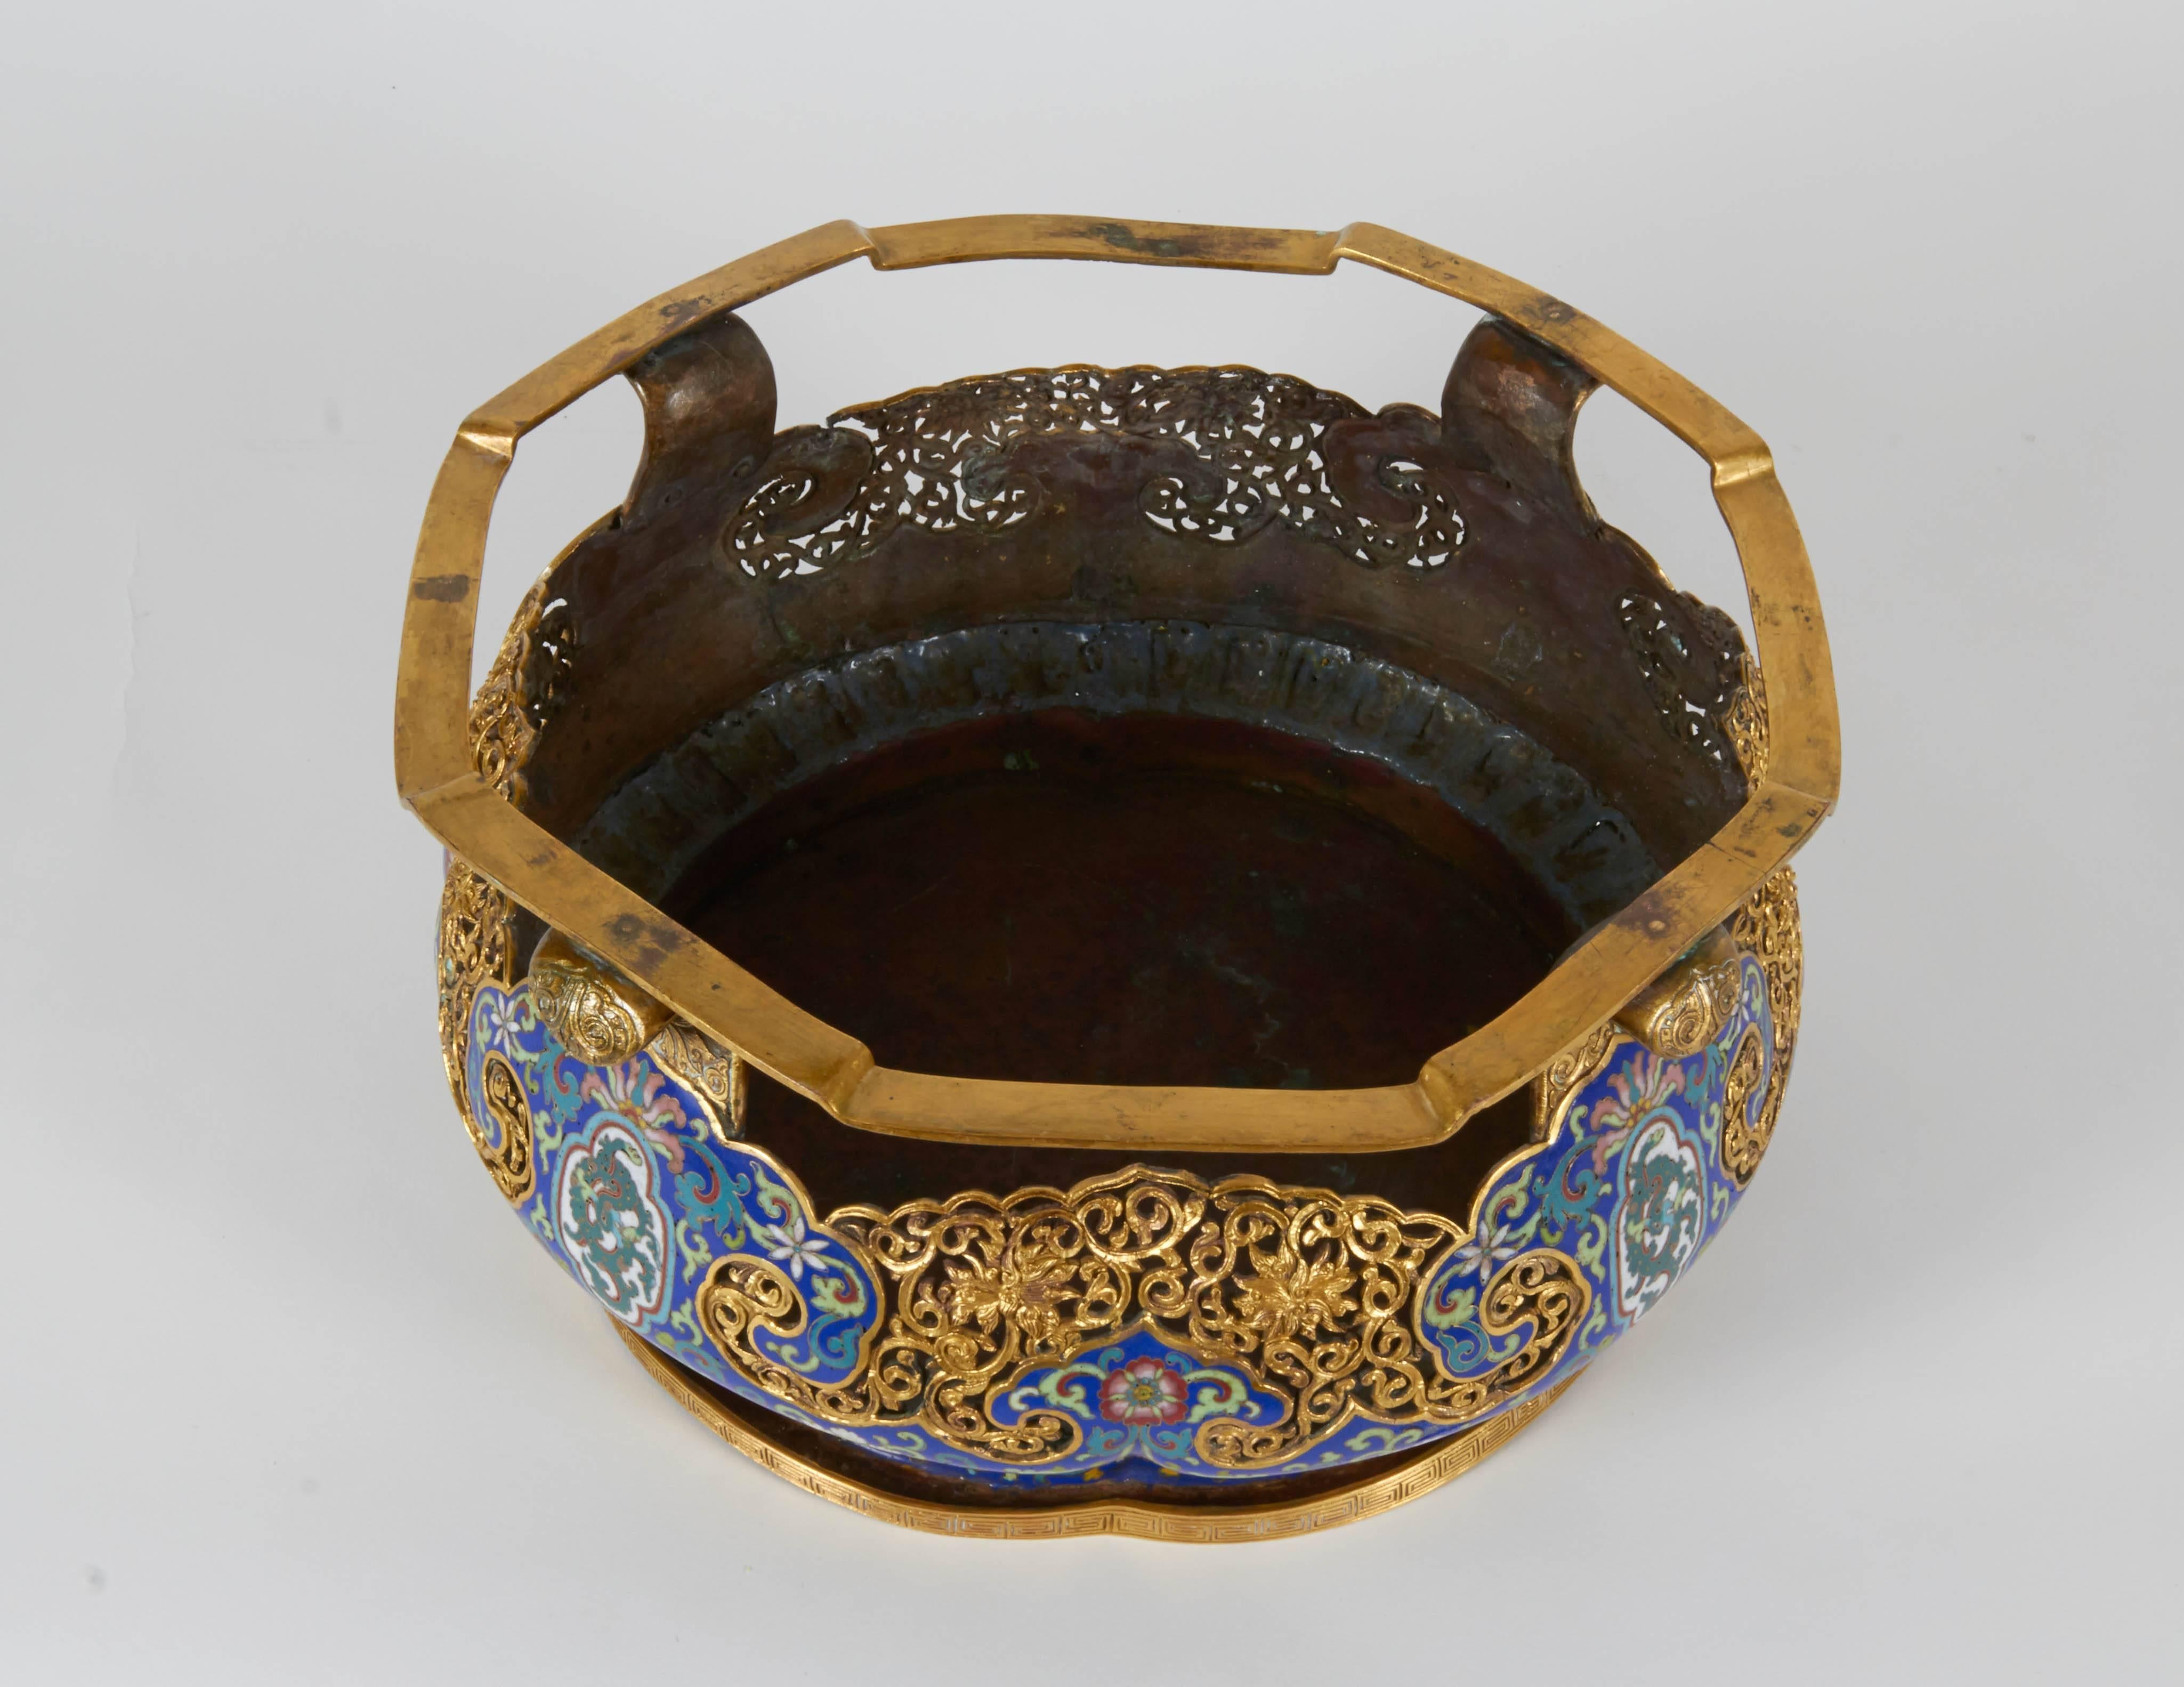 Bronze Antique Chinese Cloisonné and Champleve Enamel Scholor's Table